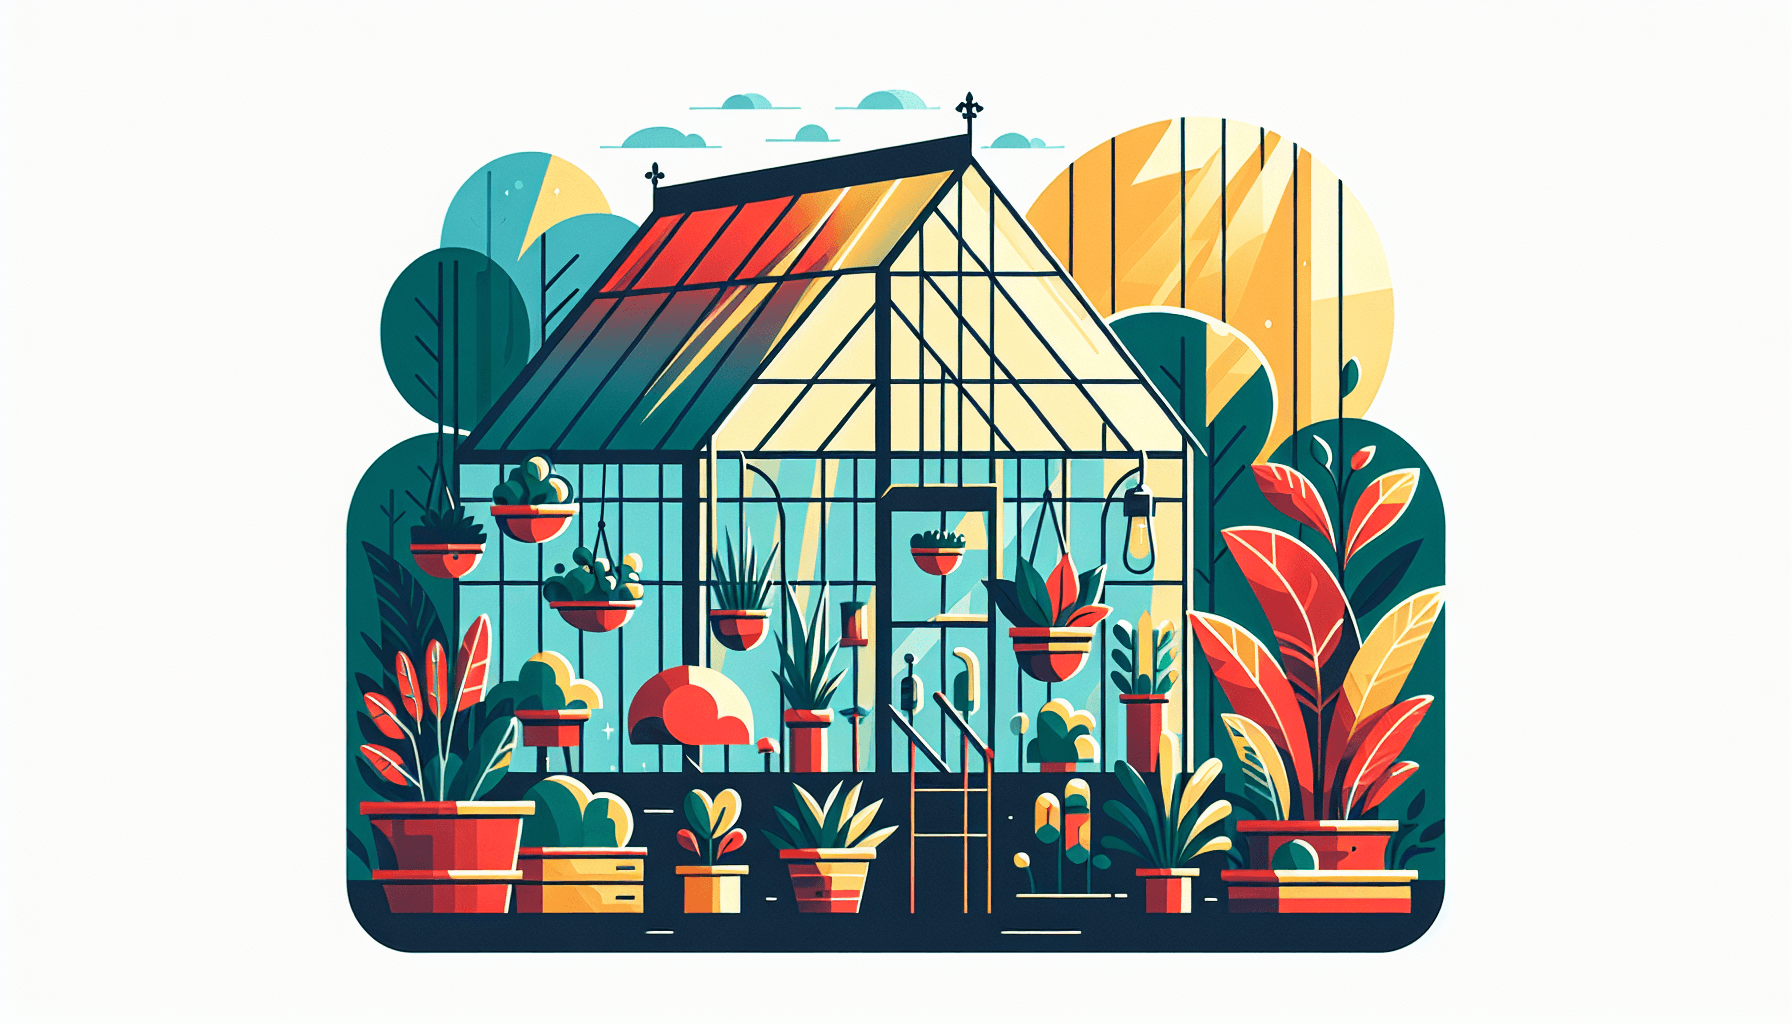 Greenhouse in flat illustration style and white background, red #f47574, green #88c7a8, yellow #fcc44b, and blue #645bc8 colors.